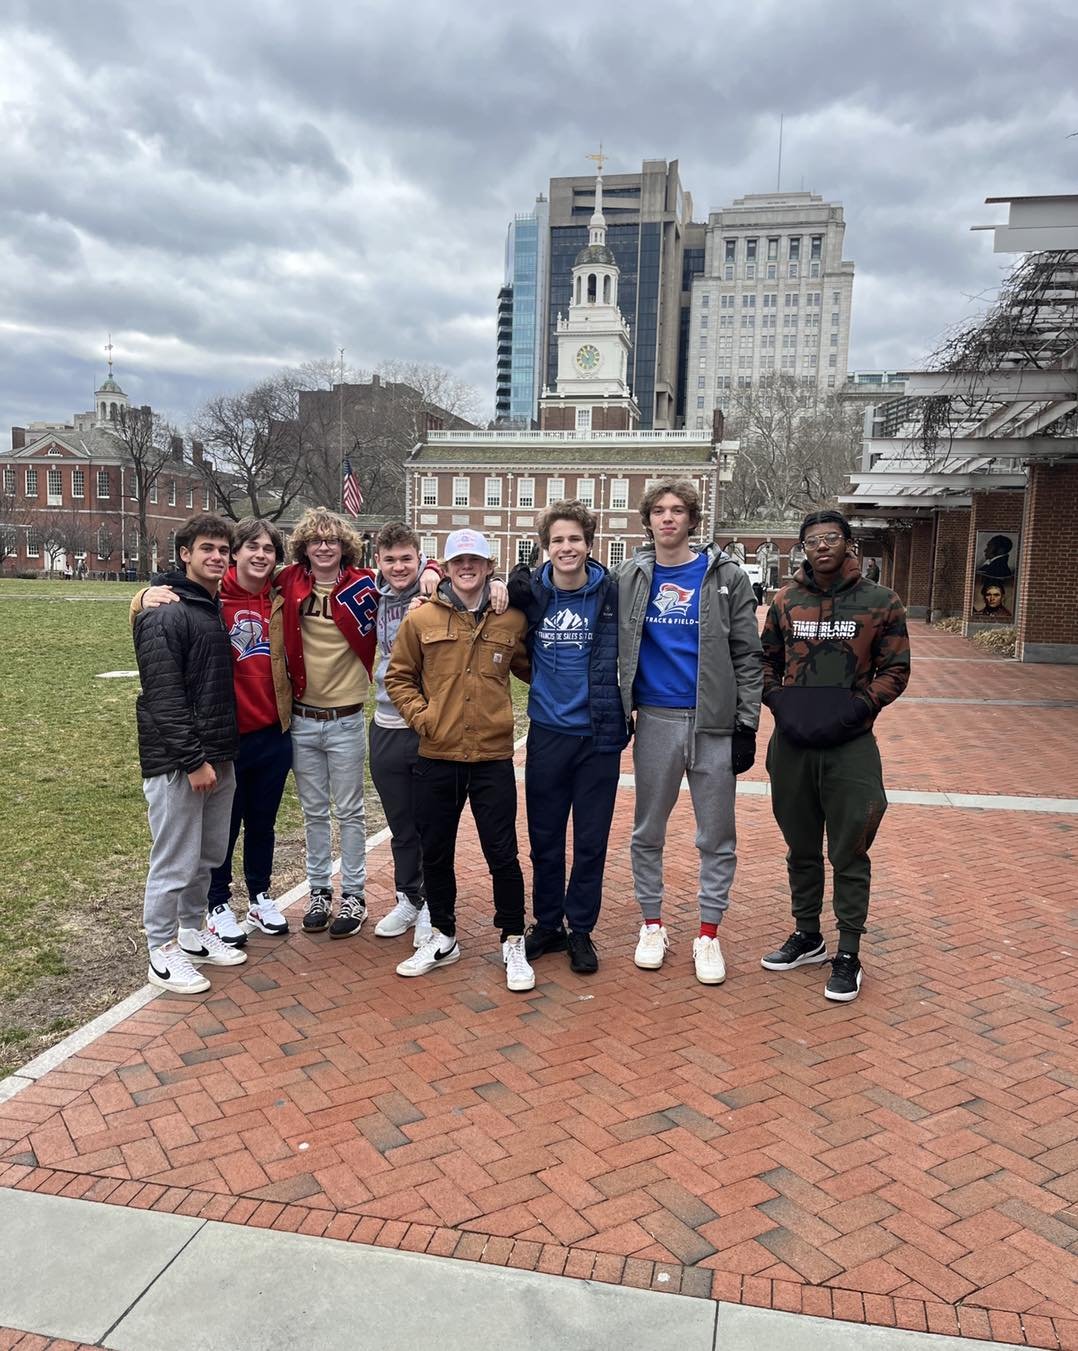  Students from St. Francis de Sales School, Toledo, OH, traveled to Delaware to visit and bond with Salesian brothers at Salesianum Schoo, Wilmington, DE to celebrate the feast week of Saint Francis de Sales. 